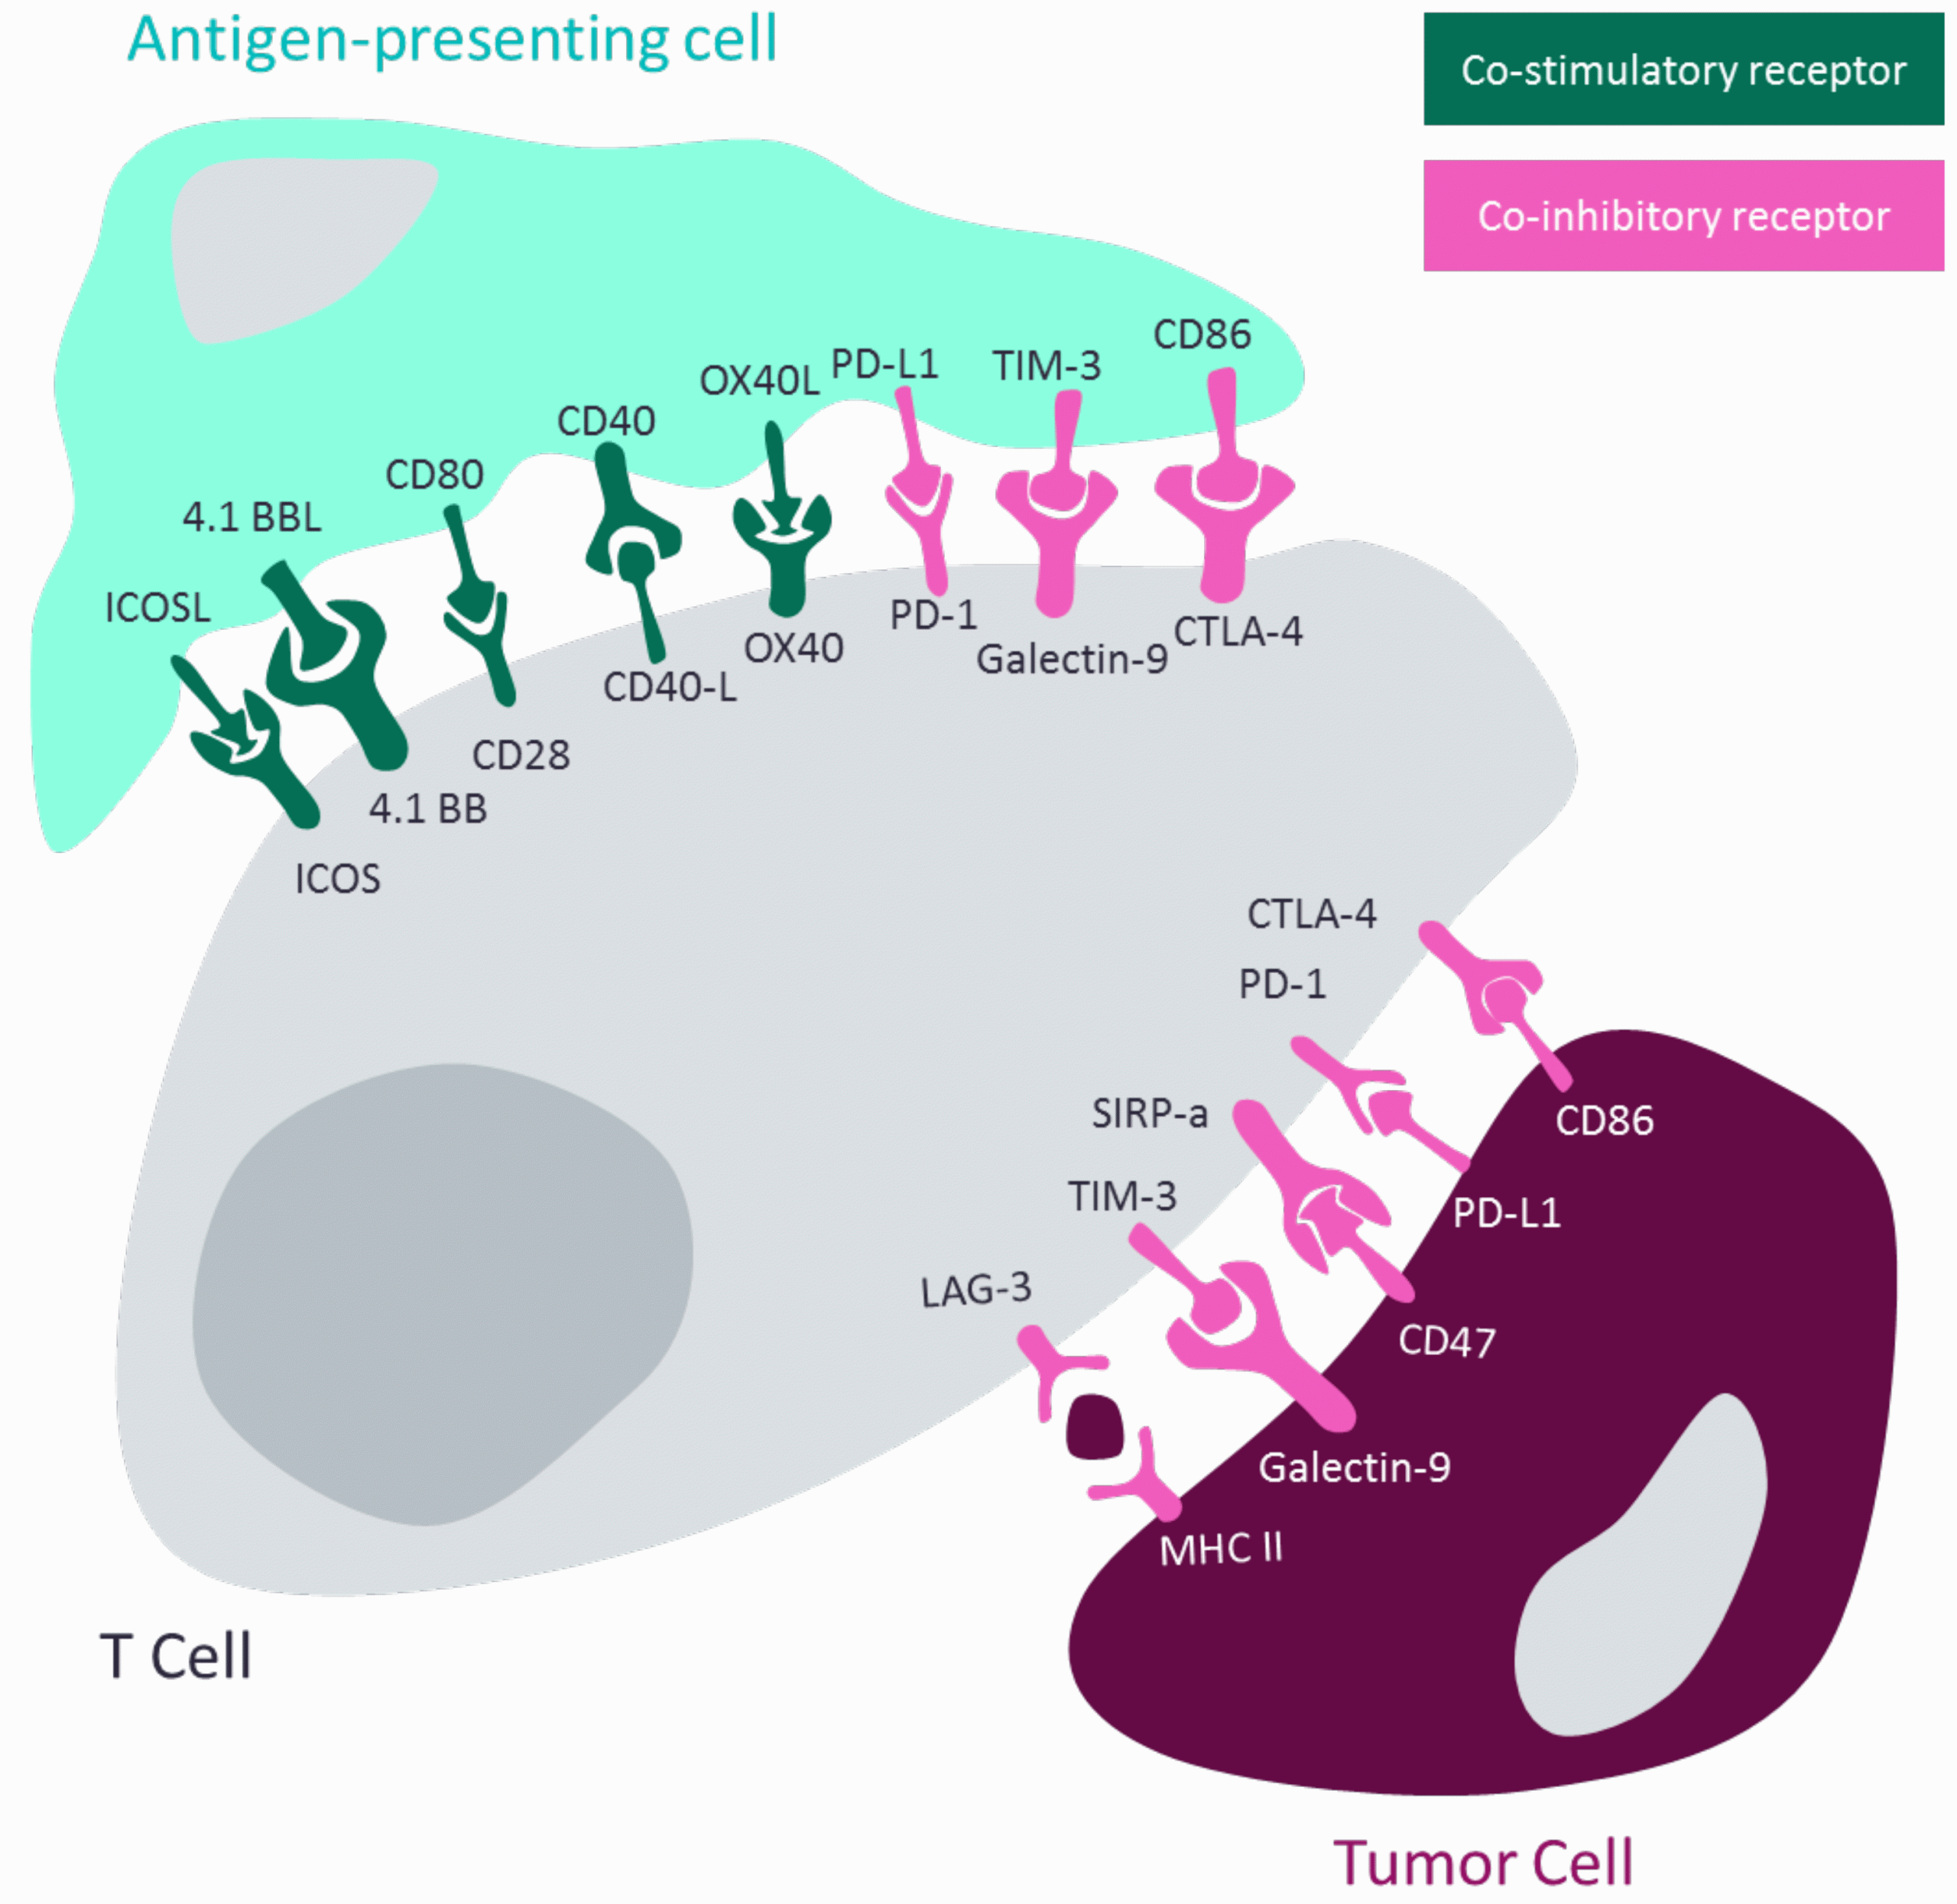 Figure 1: Diagram demonstrating how T-cell activation or inhibition is regulated by antigen-presenting cells and how tumour-cells hijack this mechanism. Adapted from Shin and Ribas 20155 and Wykes and Lewin 2017.6